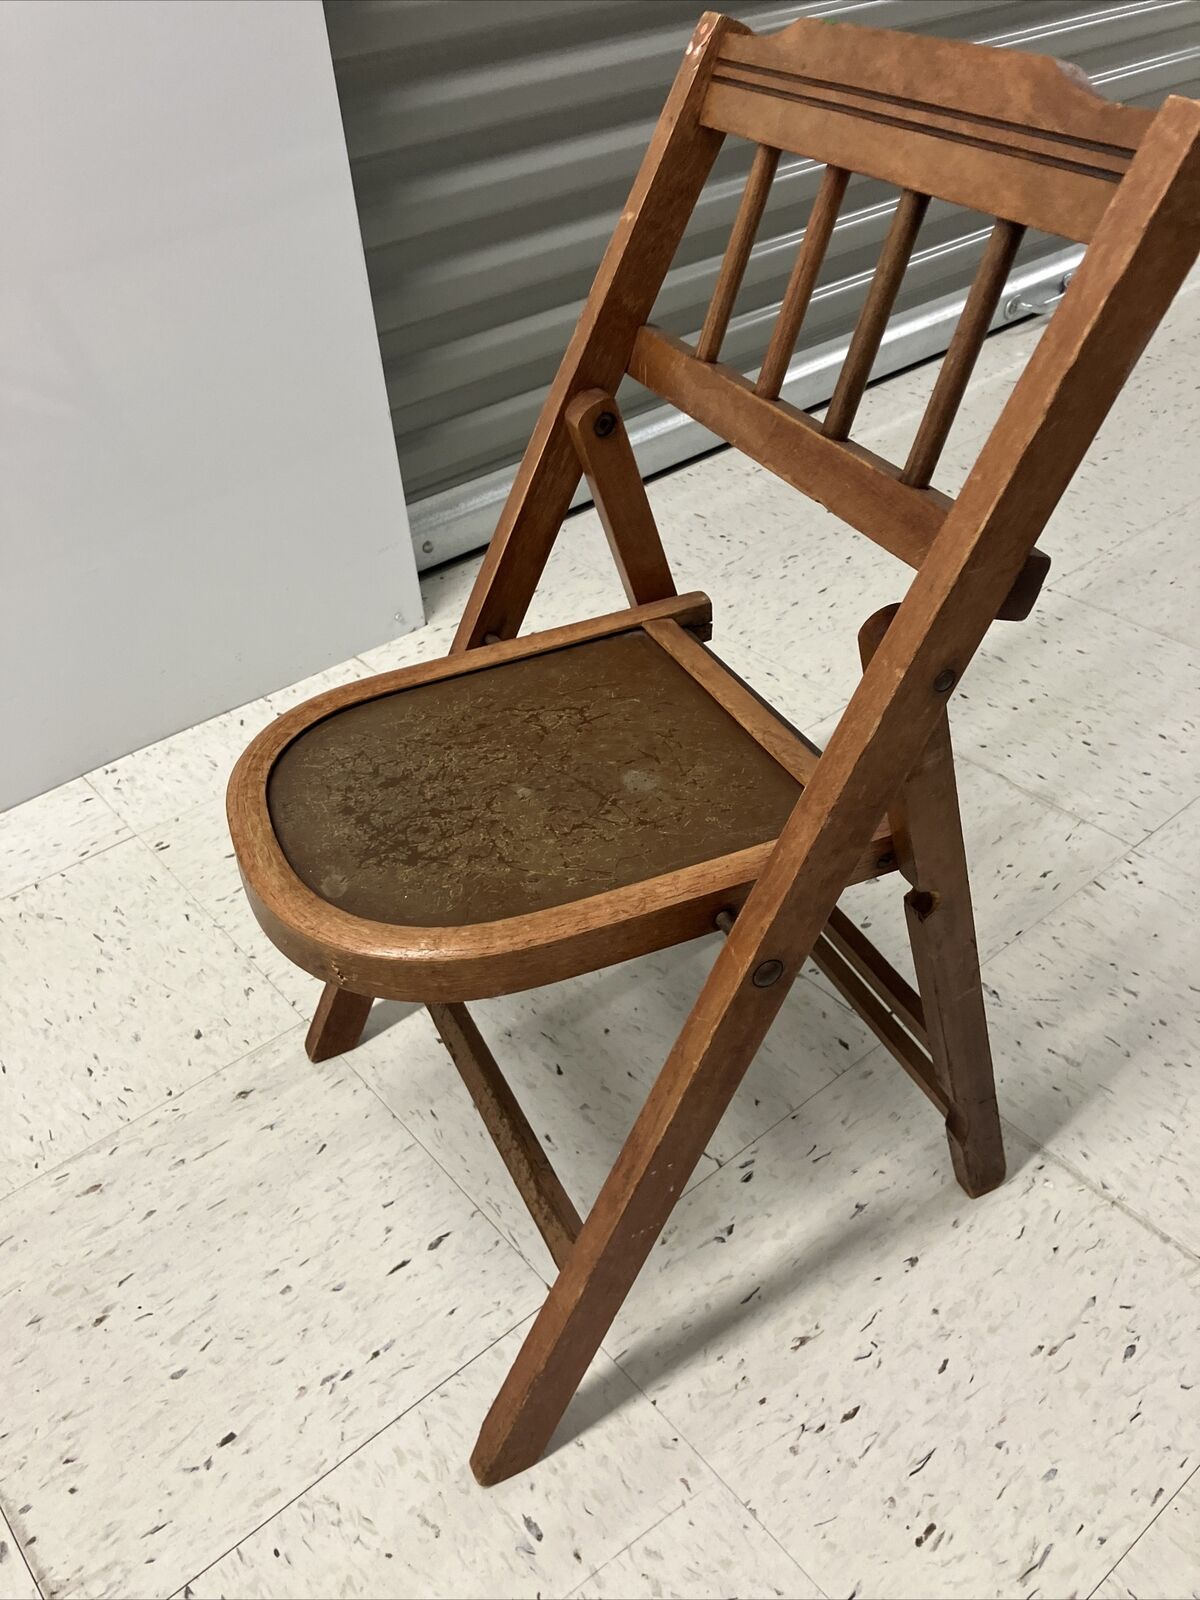 Vintage Child\'s Wooden Folding Chair 1940s/1950s.